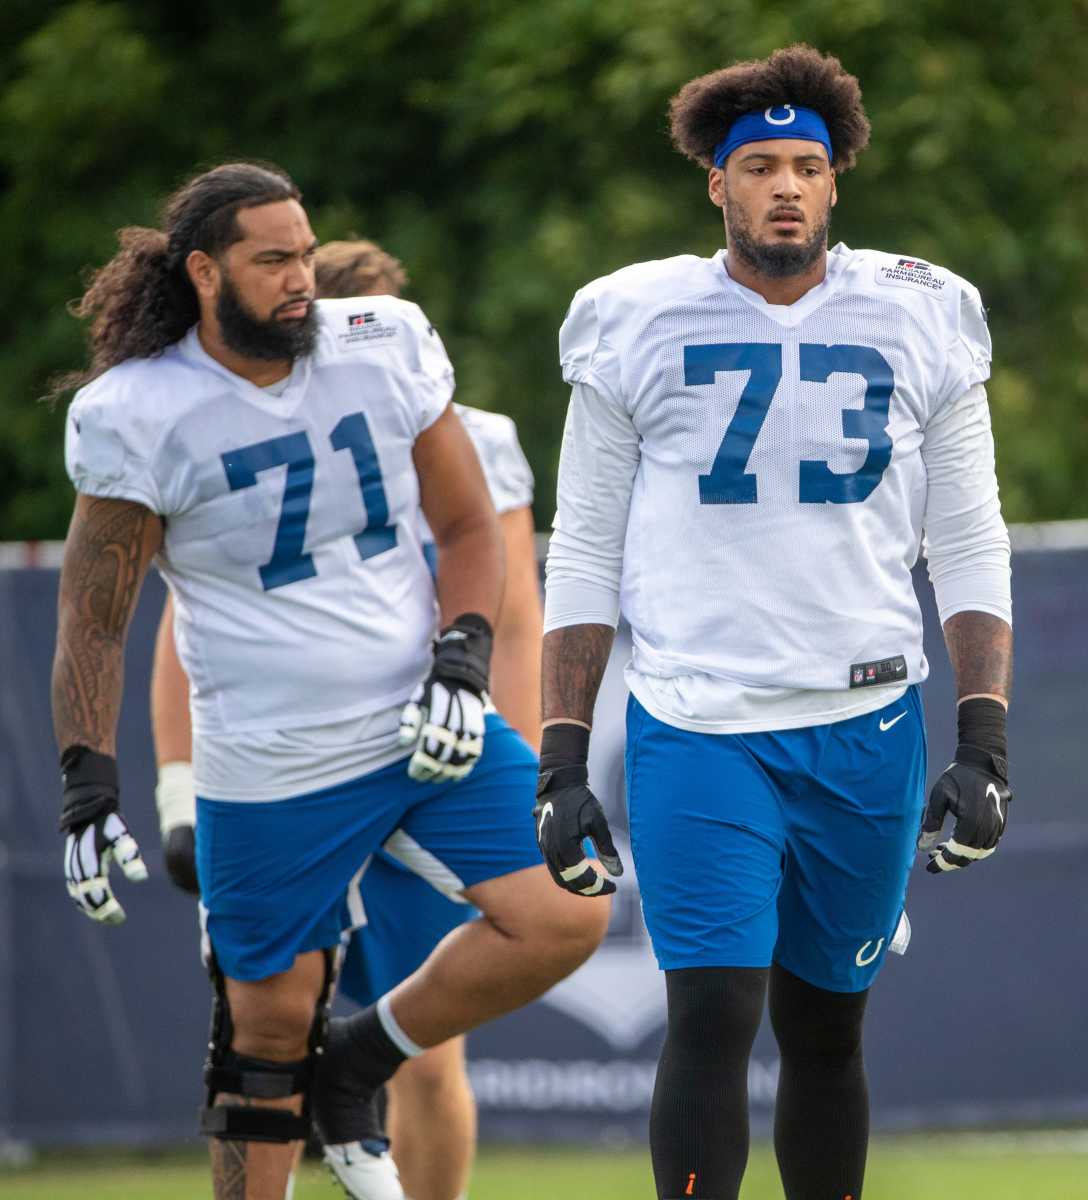 Indianapolis Colts offensive tackle Sam Tevi (71) and Indianapolis Colts offensive tackle Julien Davenport (73) at Grand Park in Westfield on Monday, August 10, 2021, on the third week of workouts of this summer's Colts training camp. Wentz Back At Colts Camp